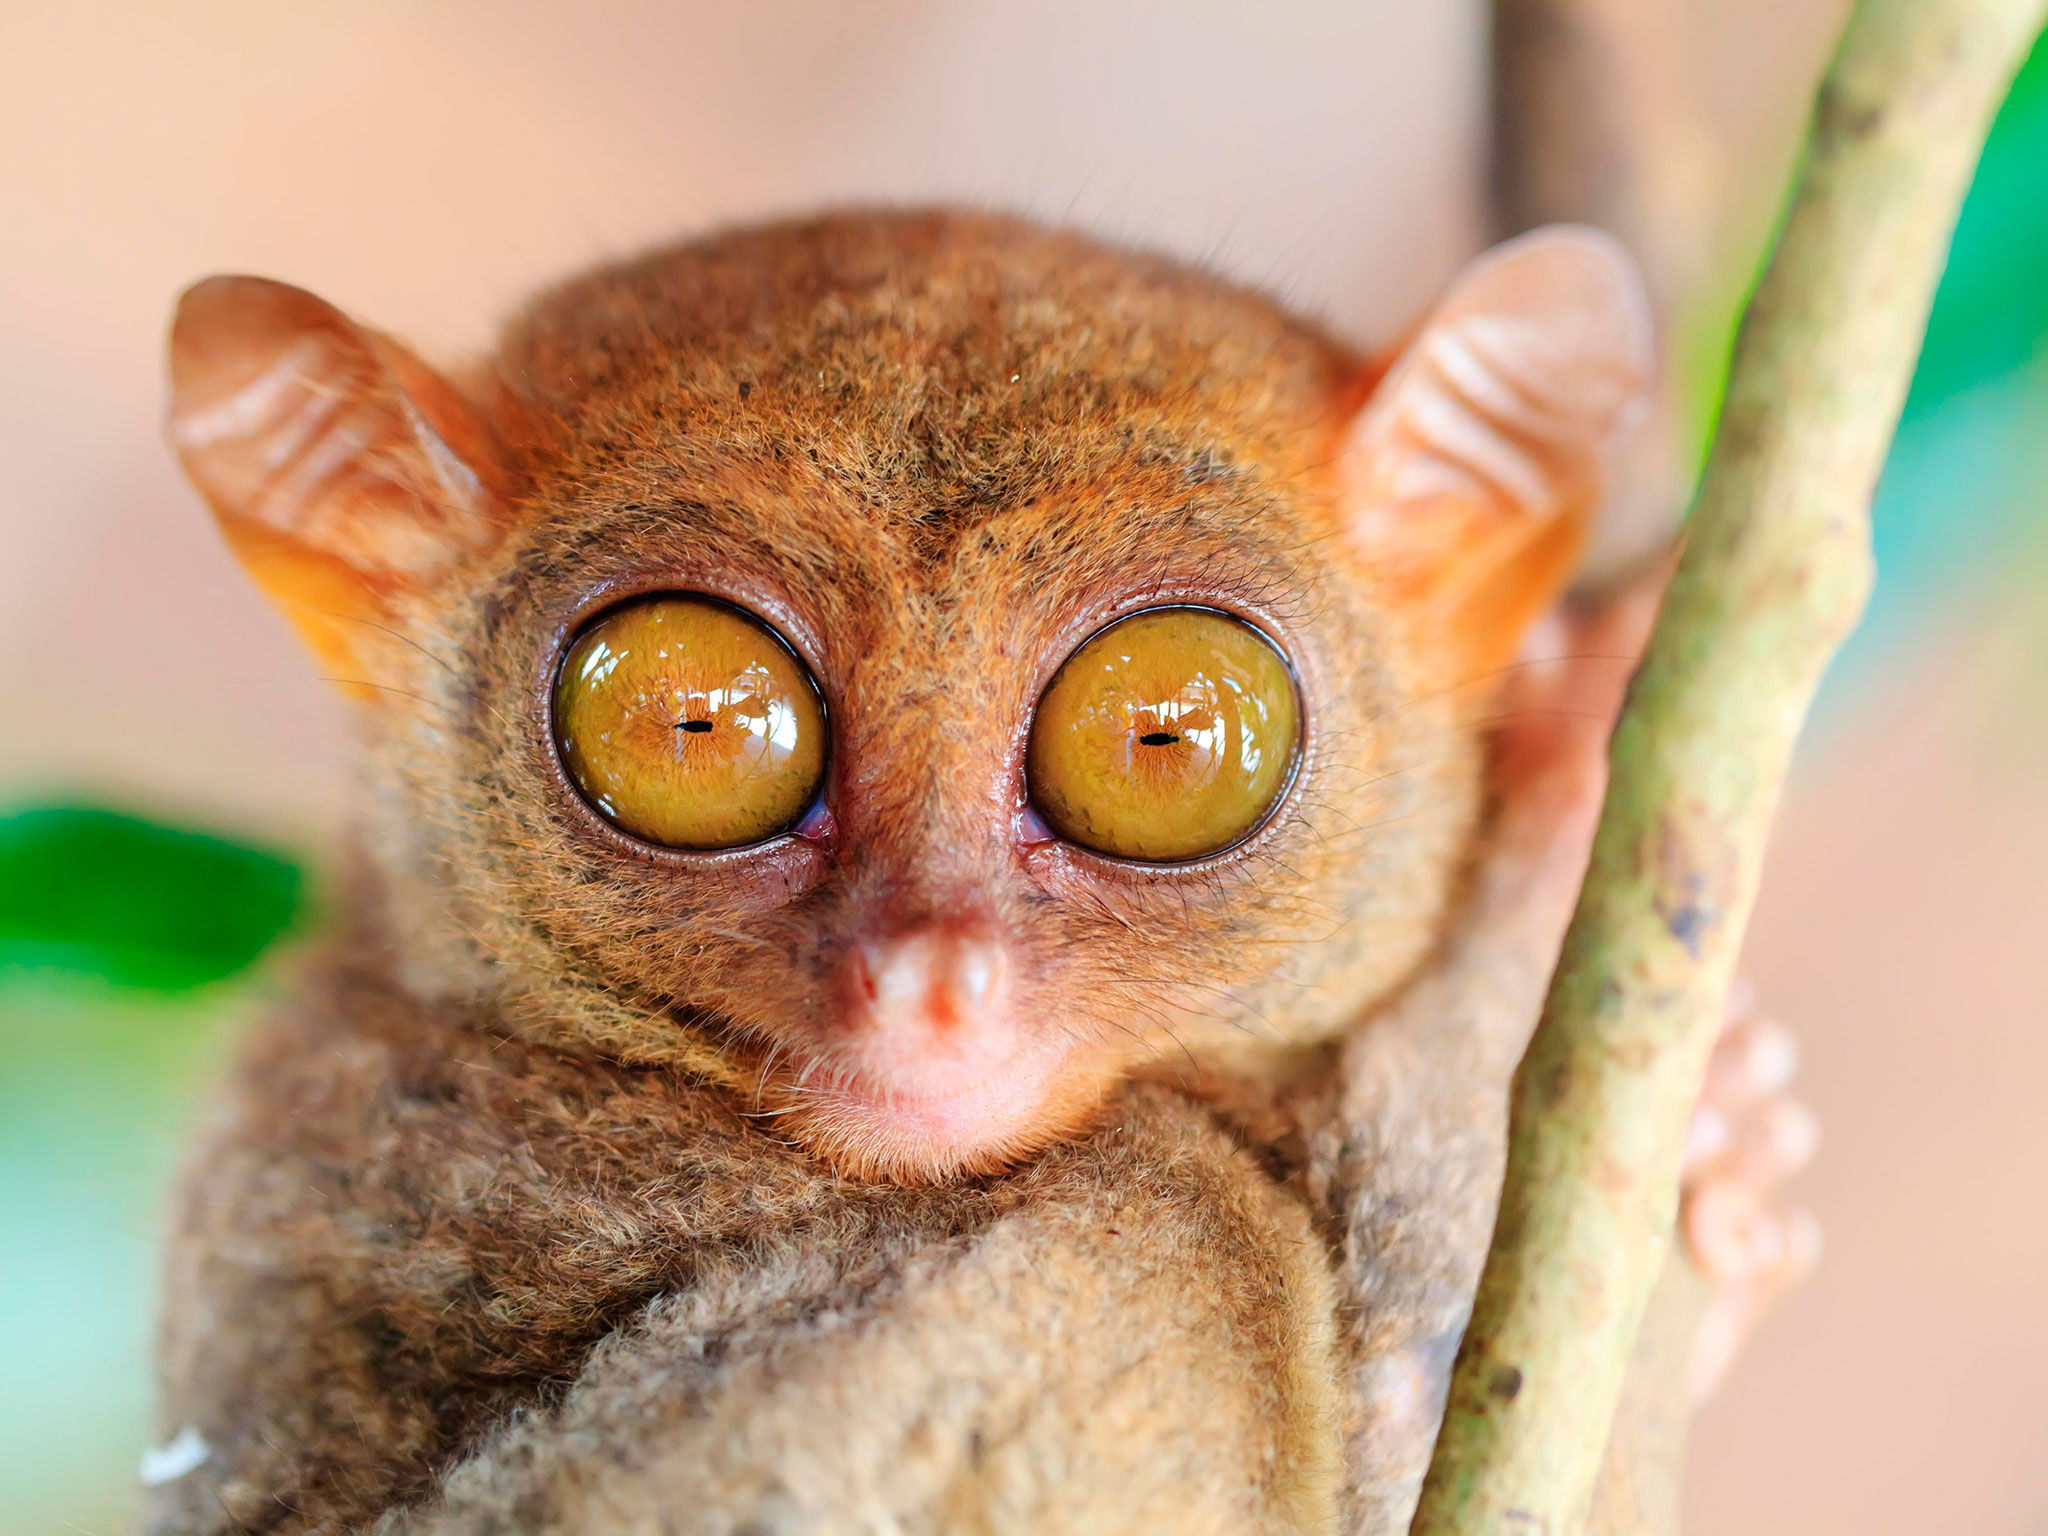 This Animal's Eye Makes Up Almost Half of Its Body | Primate, Animal ...